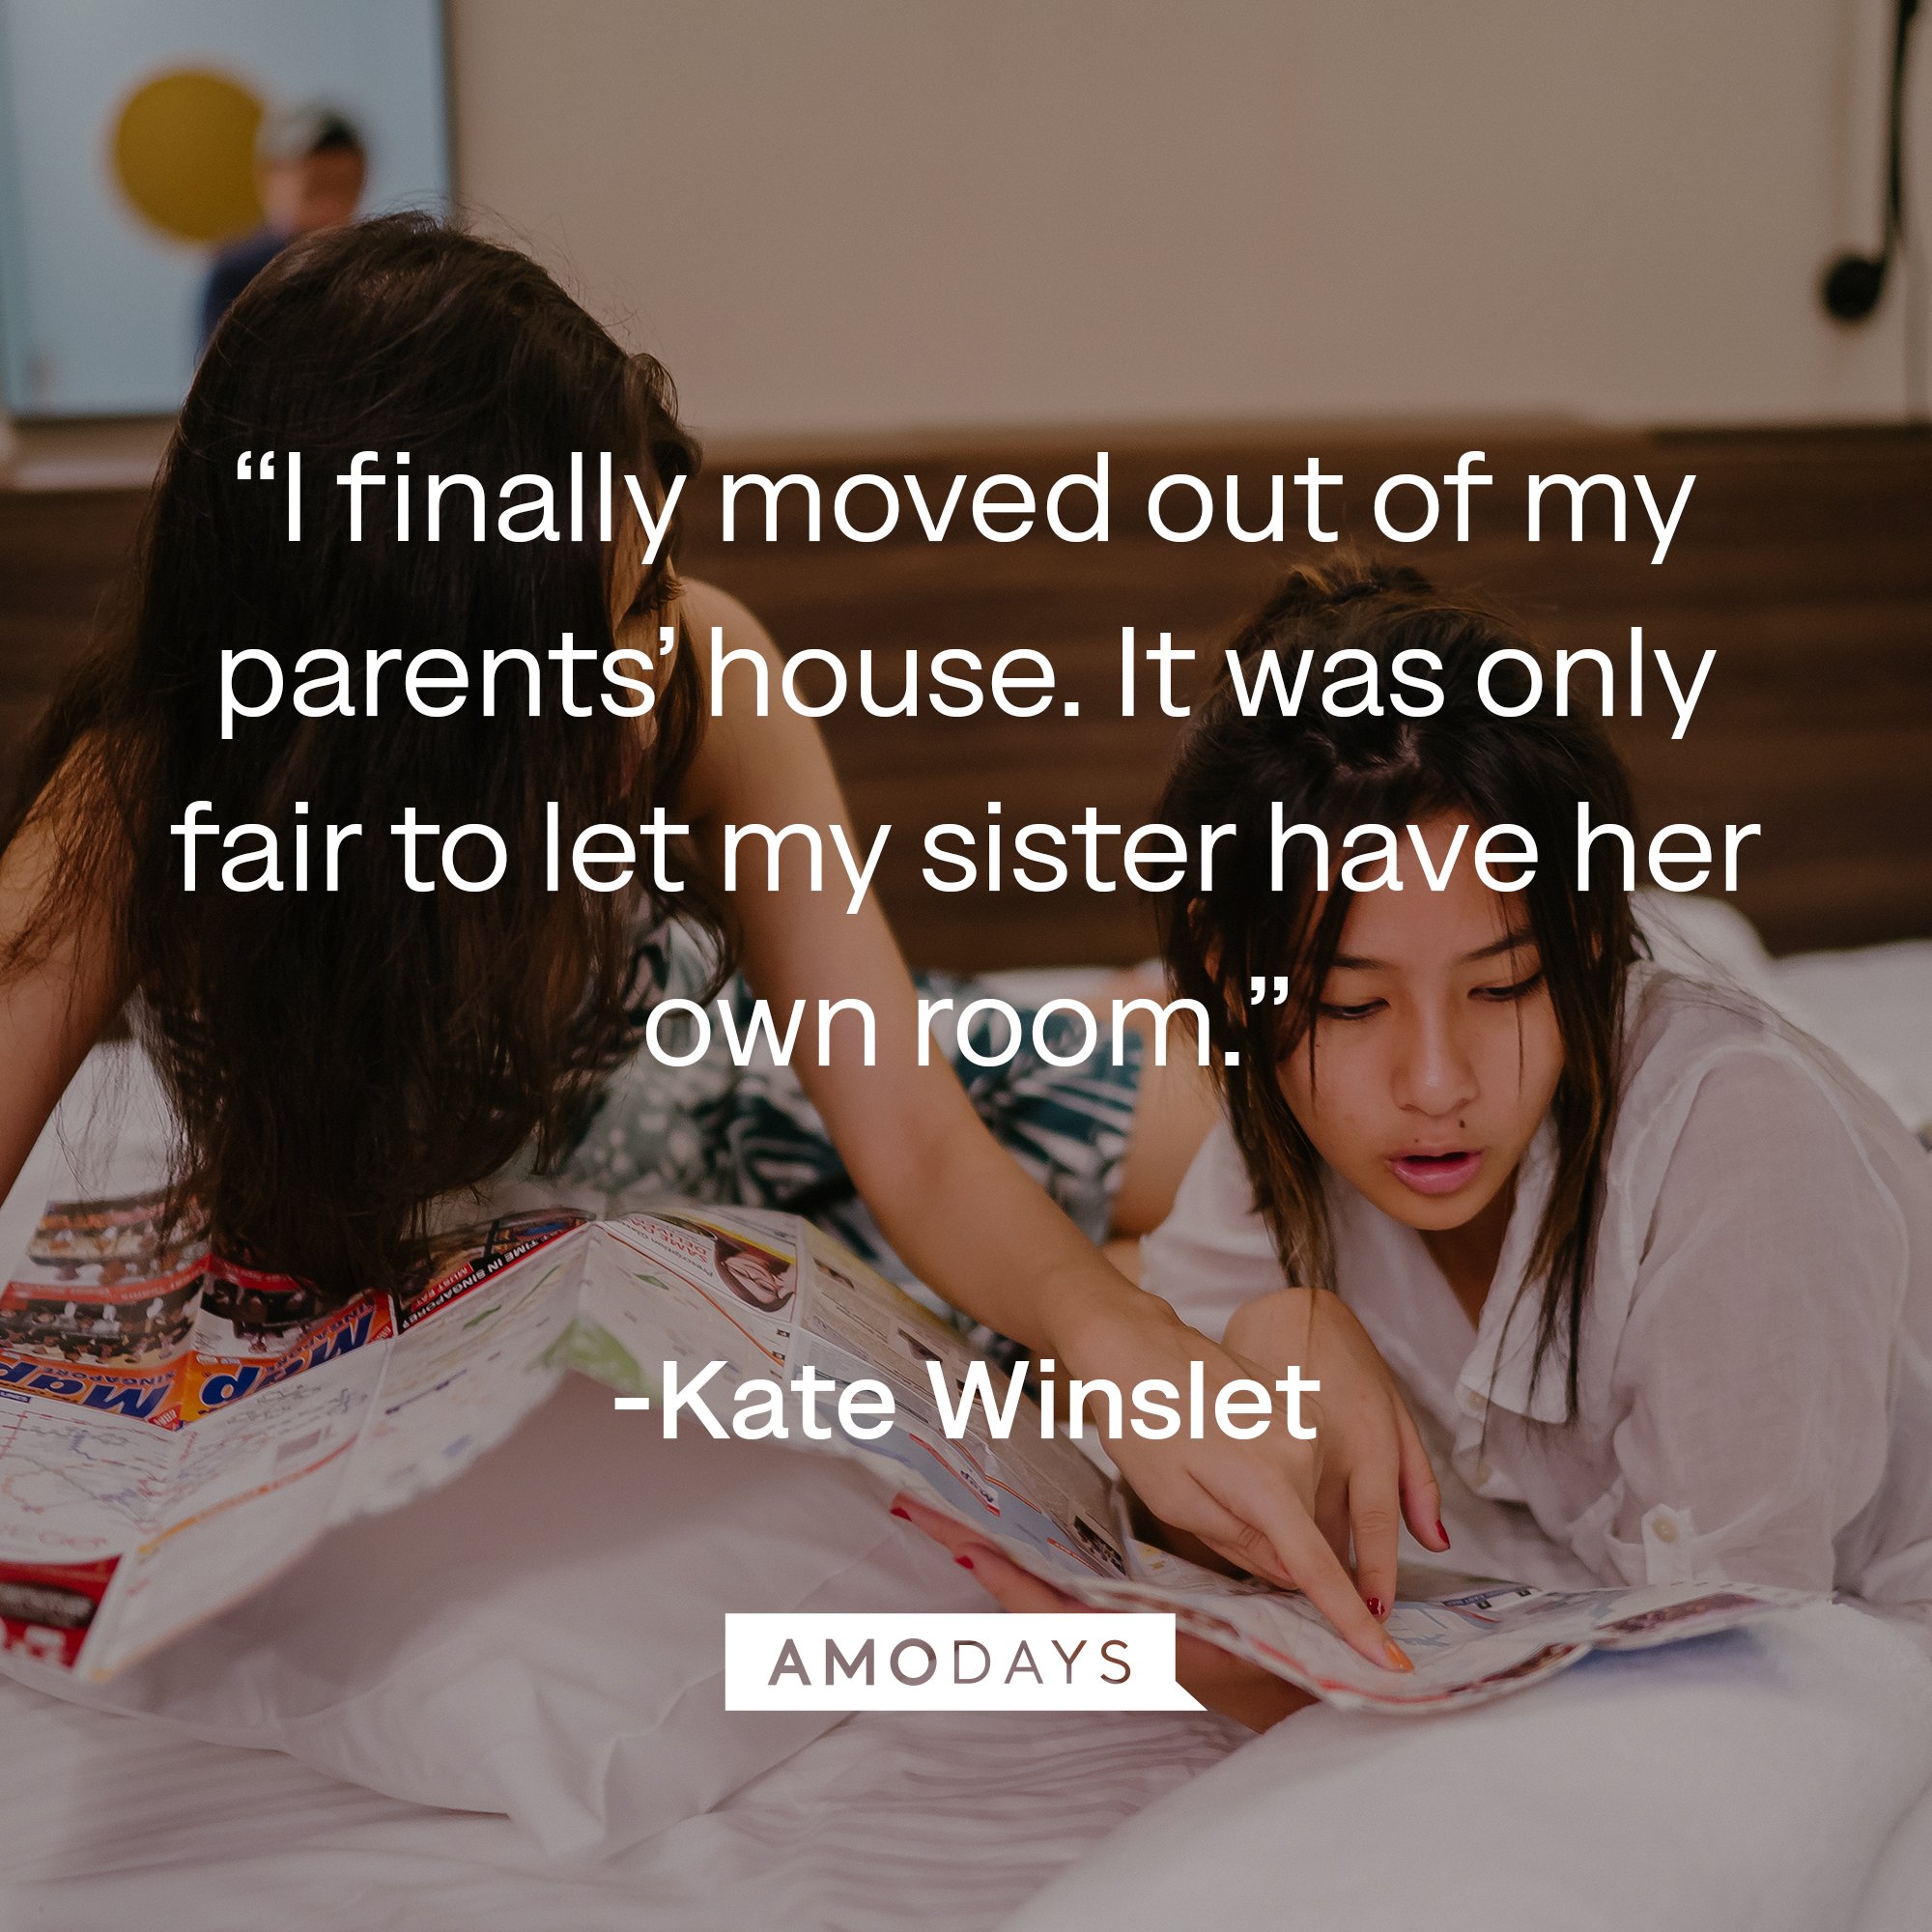  Kate Winslet's quote: “I finally moved out of my parents’ house. It was only fair to let my sister have her own room.” | Image: AmoDays